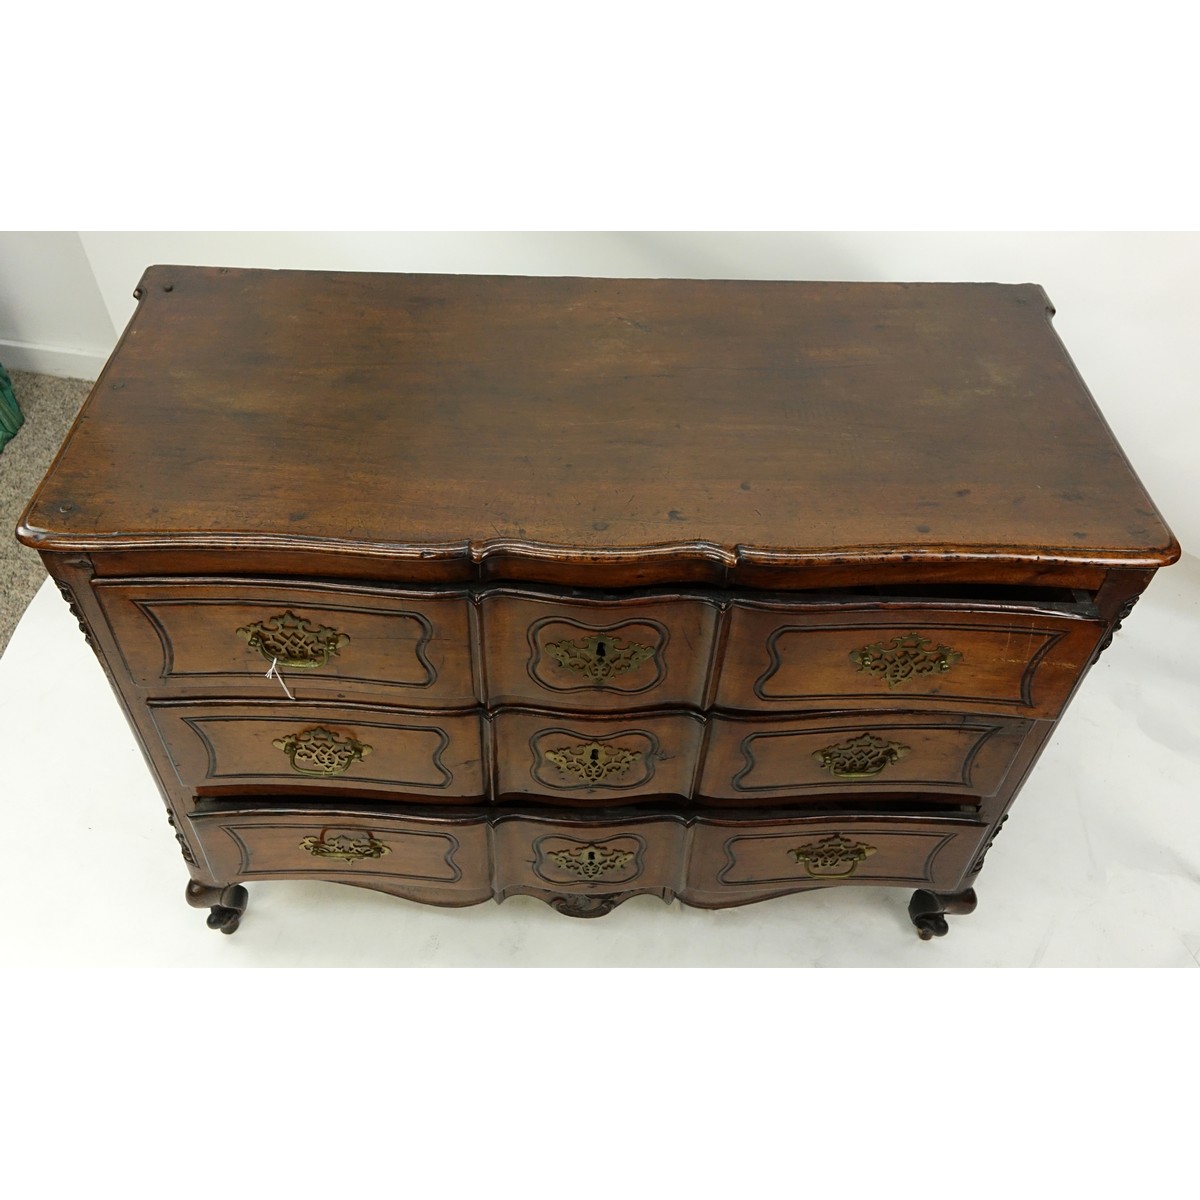 19th Century French Carved Walnut Commode/Chest of Drawers with Bronze Pulls. Three large fitted drawers and stands on front cabriole and rear bracket legs.